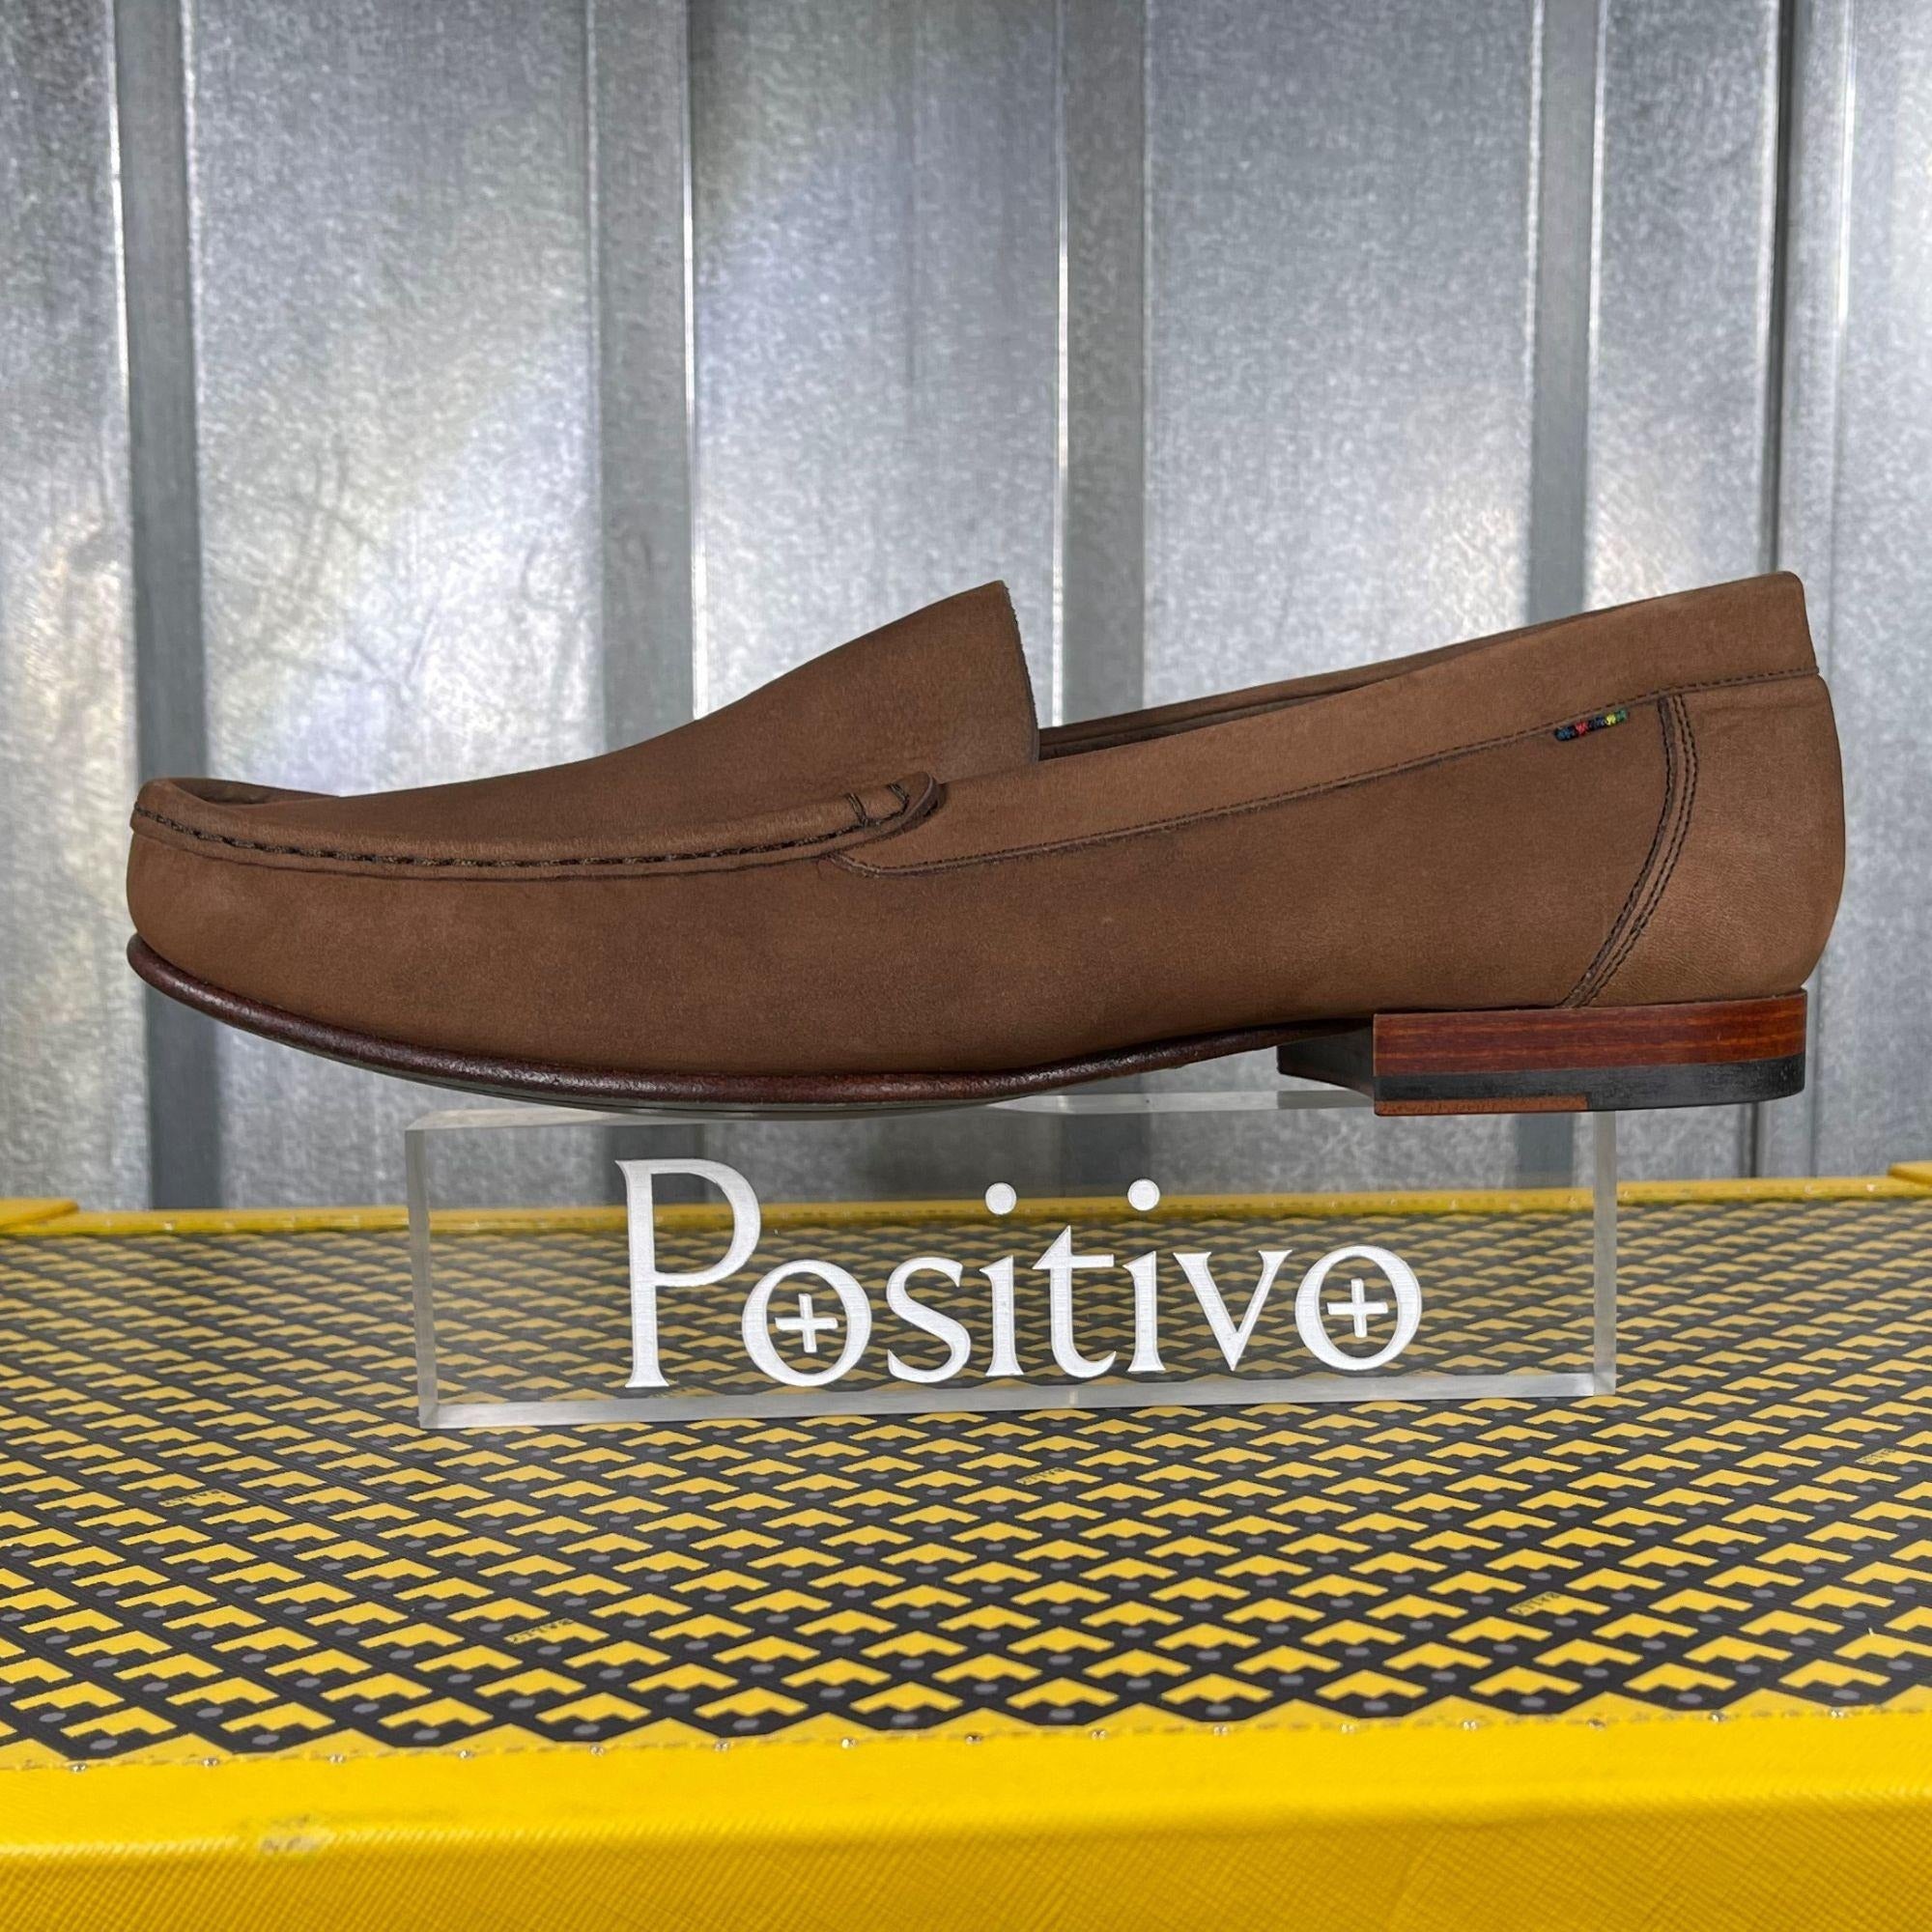 Paul Smith V095 Danny Tan Leather Loafers | Positivo Clothing